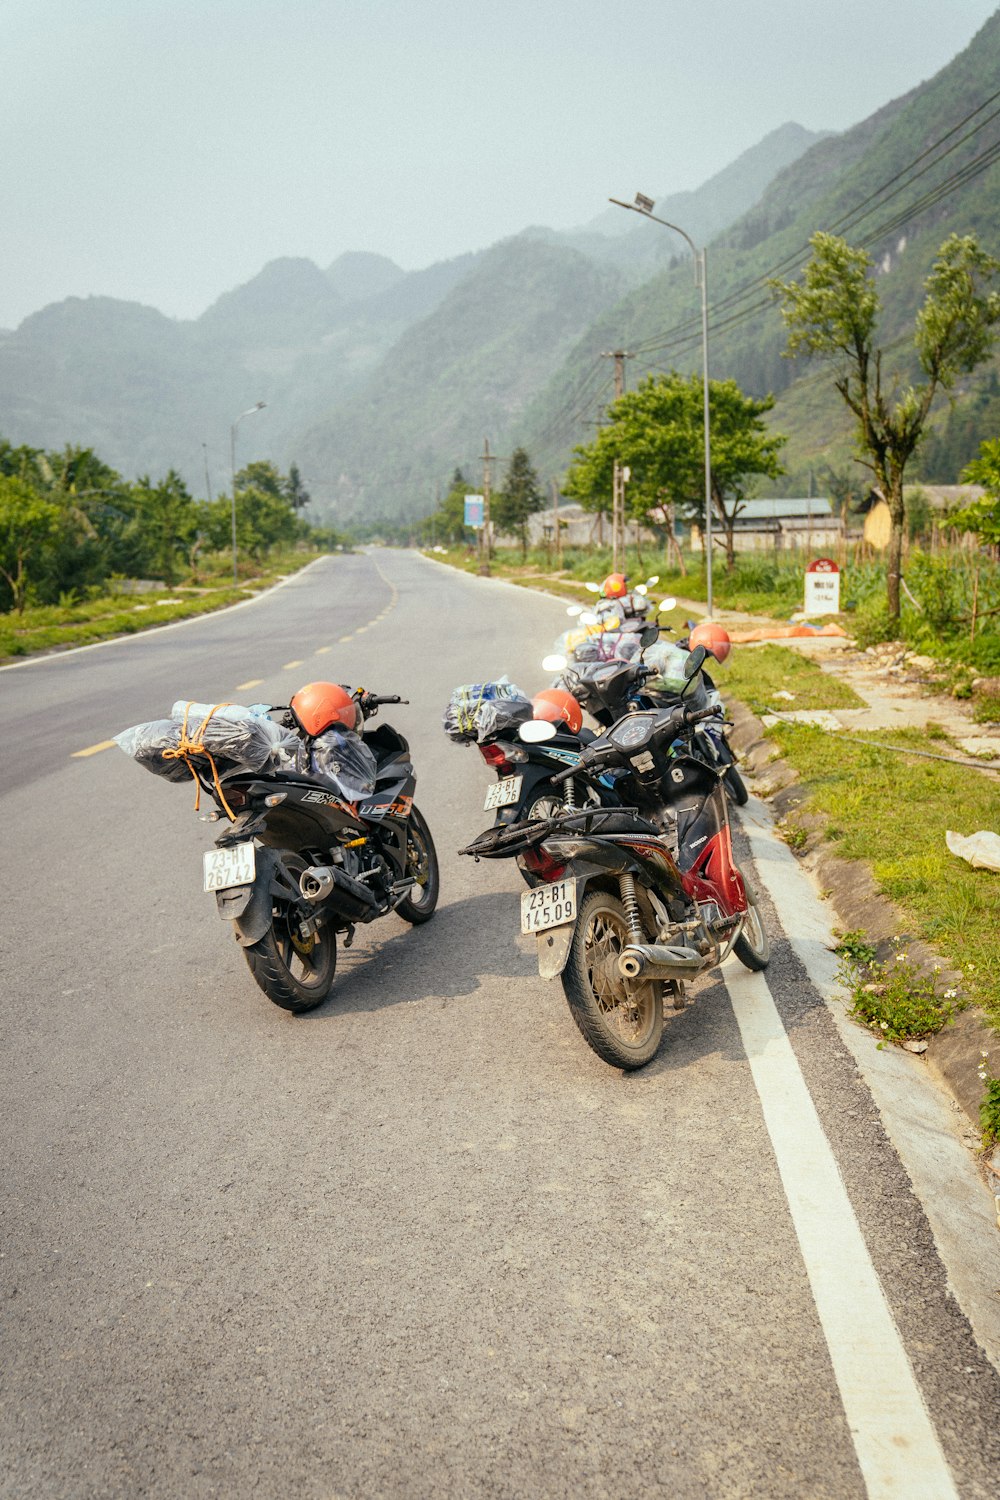 two motorcycles parked on the side of the road